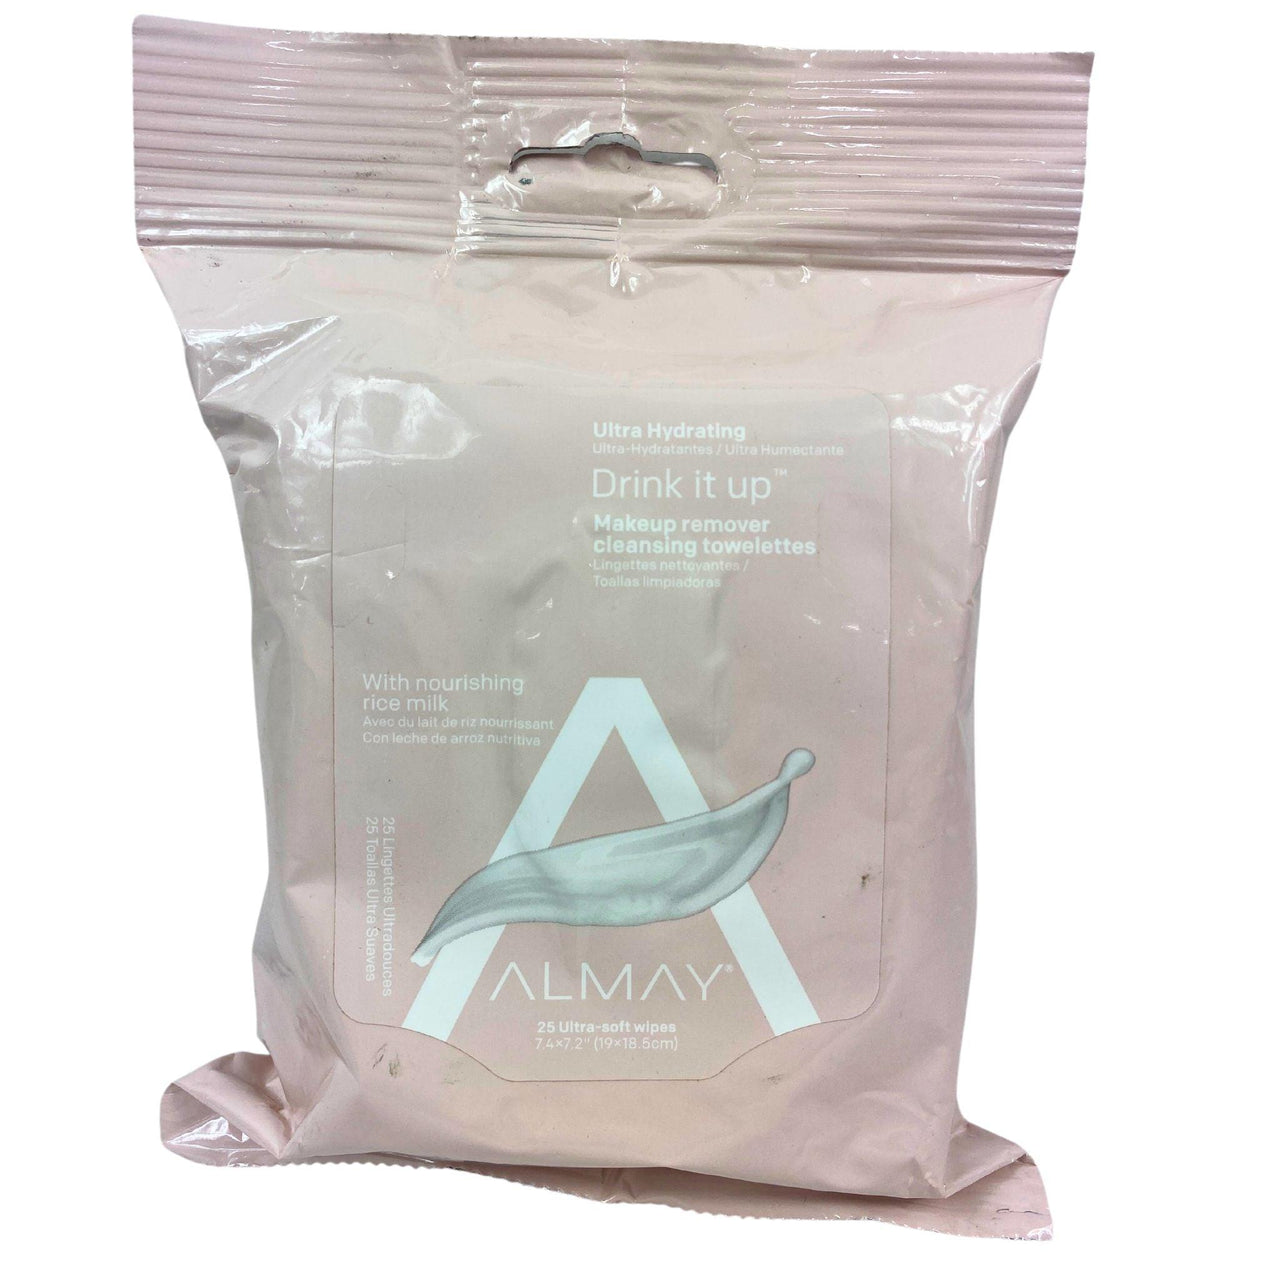 Almay Ultra Hydrating Drink it up Makeup Remover Cleansing Towelettes (50 Pcs Lot) - Discount Wholesalers Inc